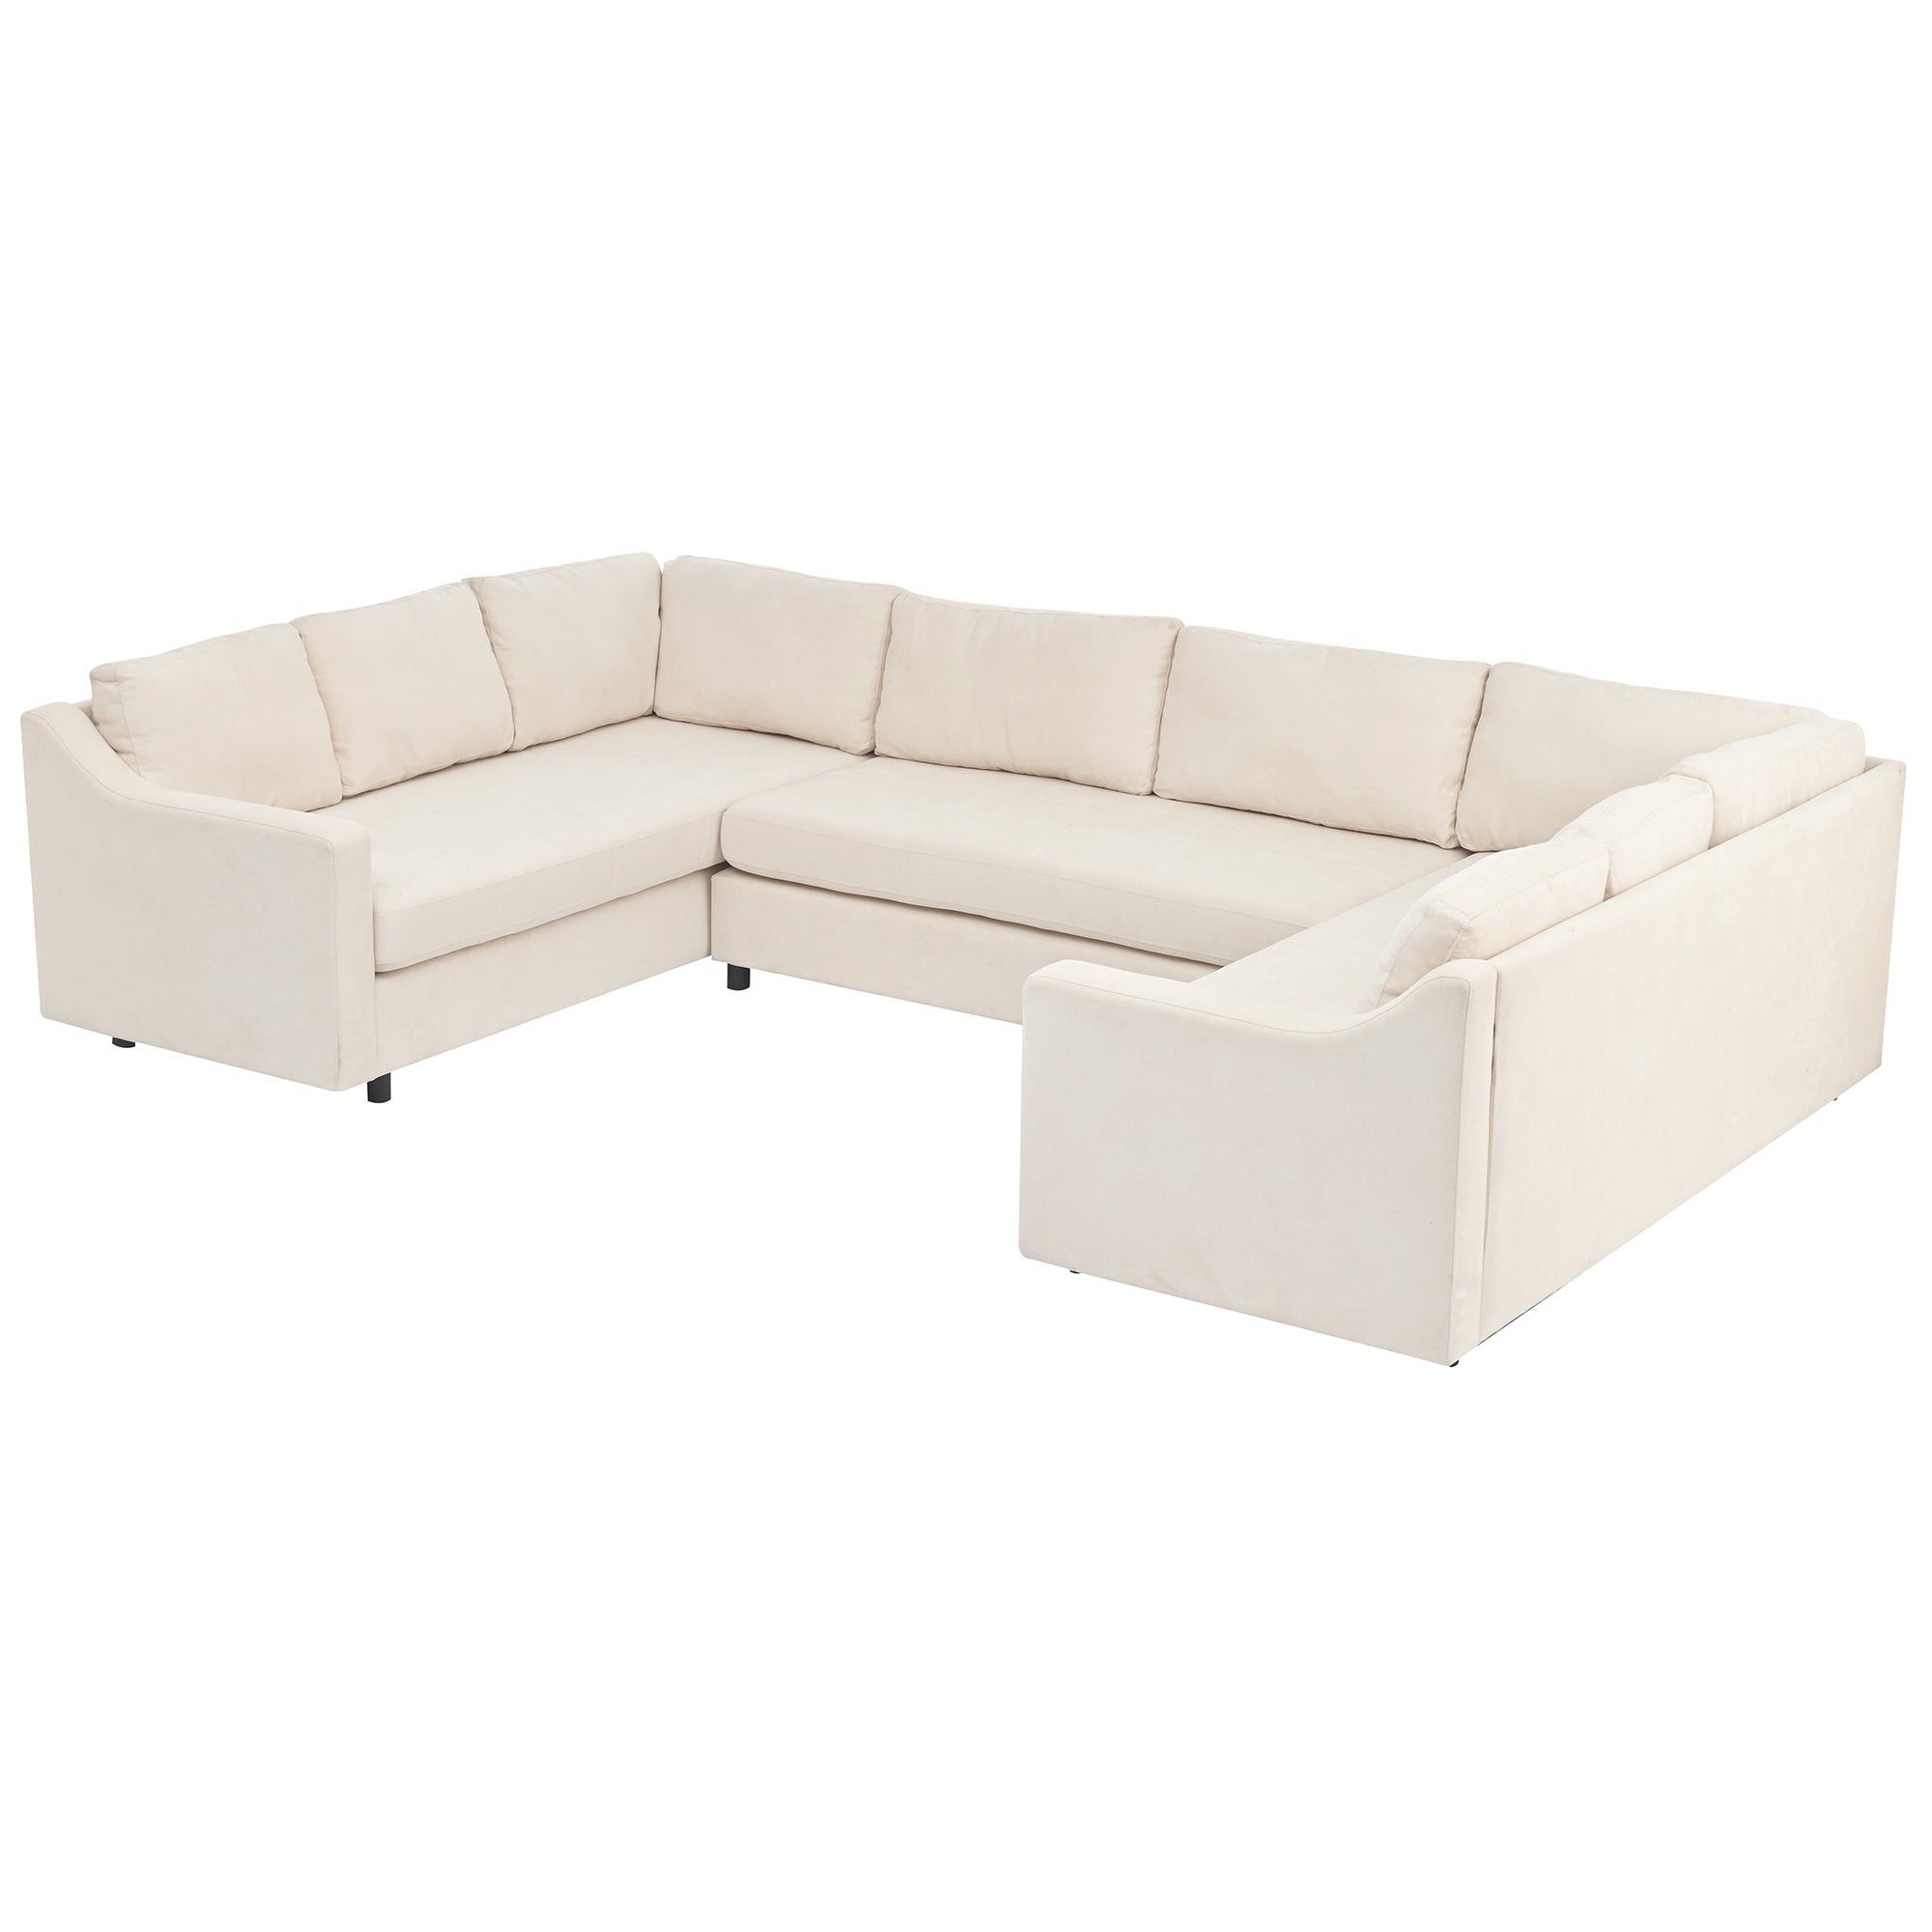 3 Pieces Upholstered U-Shaped Large Sectional Sofa with Thick Seat and Back cushions